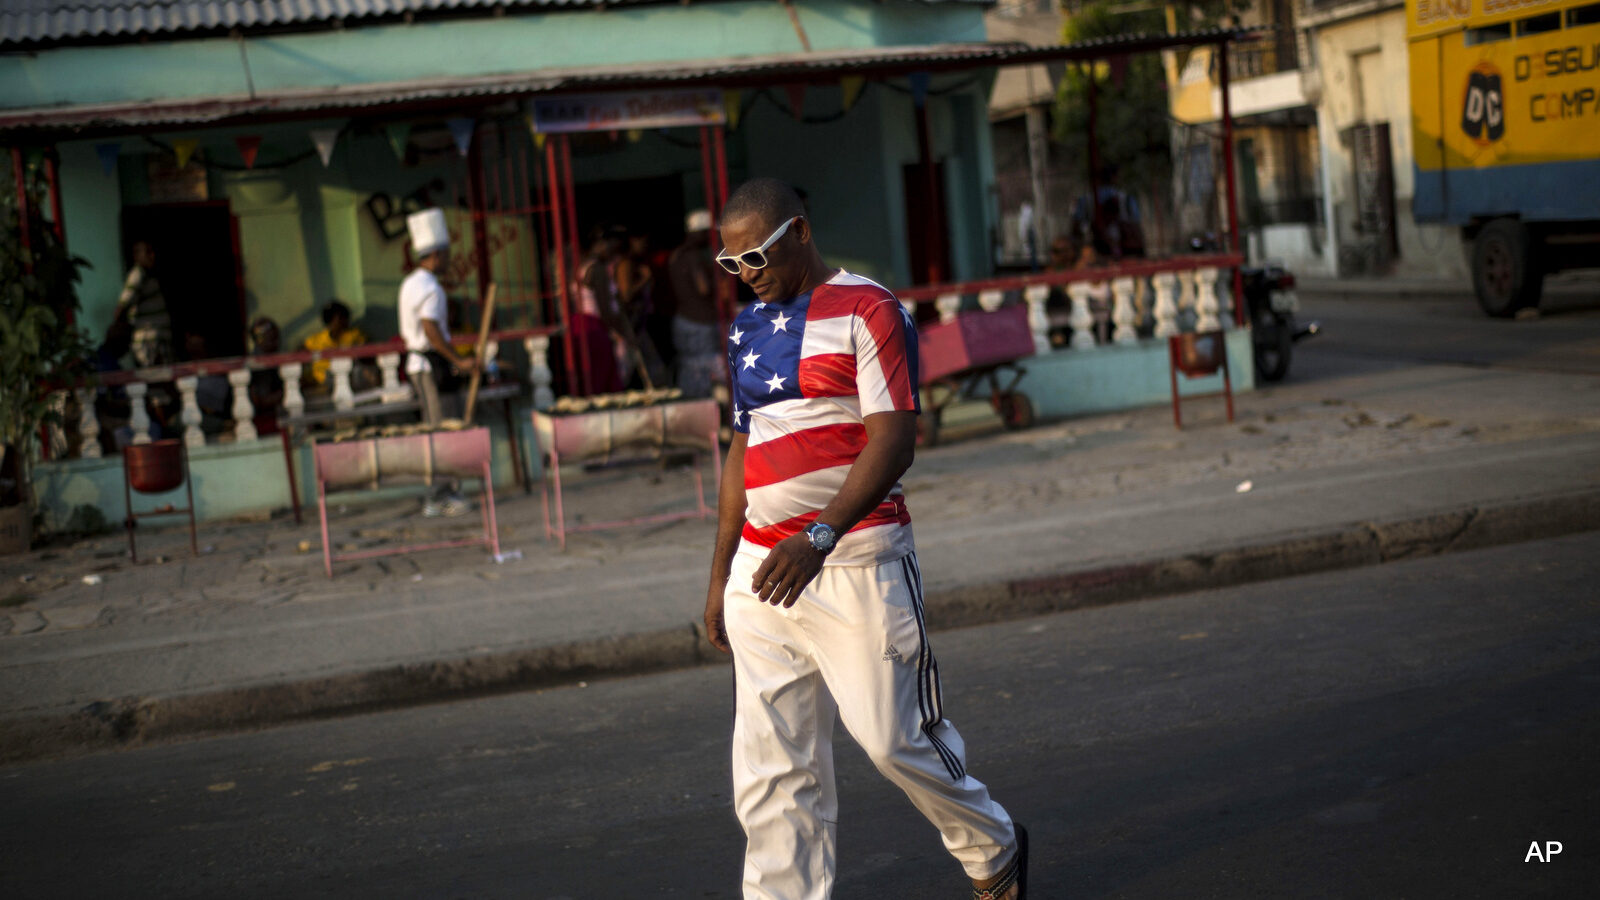 A man wears a shirt with a U.S. flag design in Santiago, Cuba. It’s easier to get from Havana to Miami than to the island’s second-largest city, which has just two overbooked flights a day and trains that are achingly slow and unpredictable. )